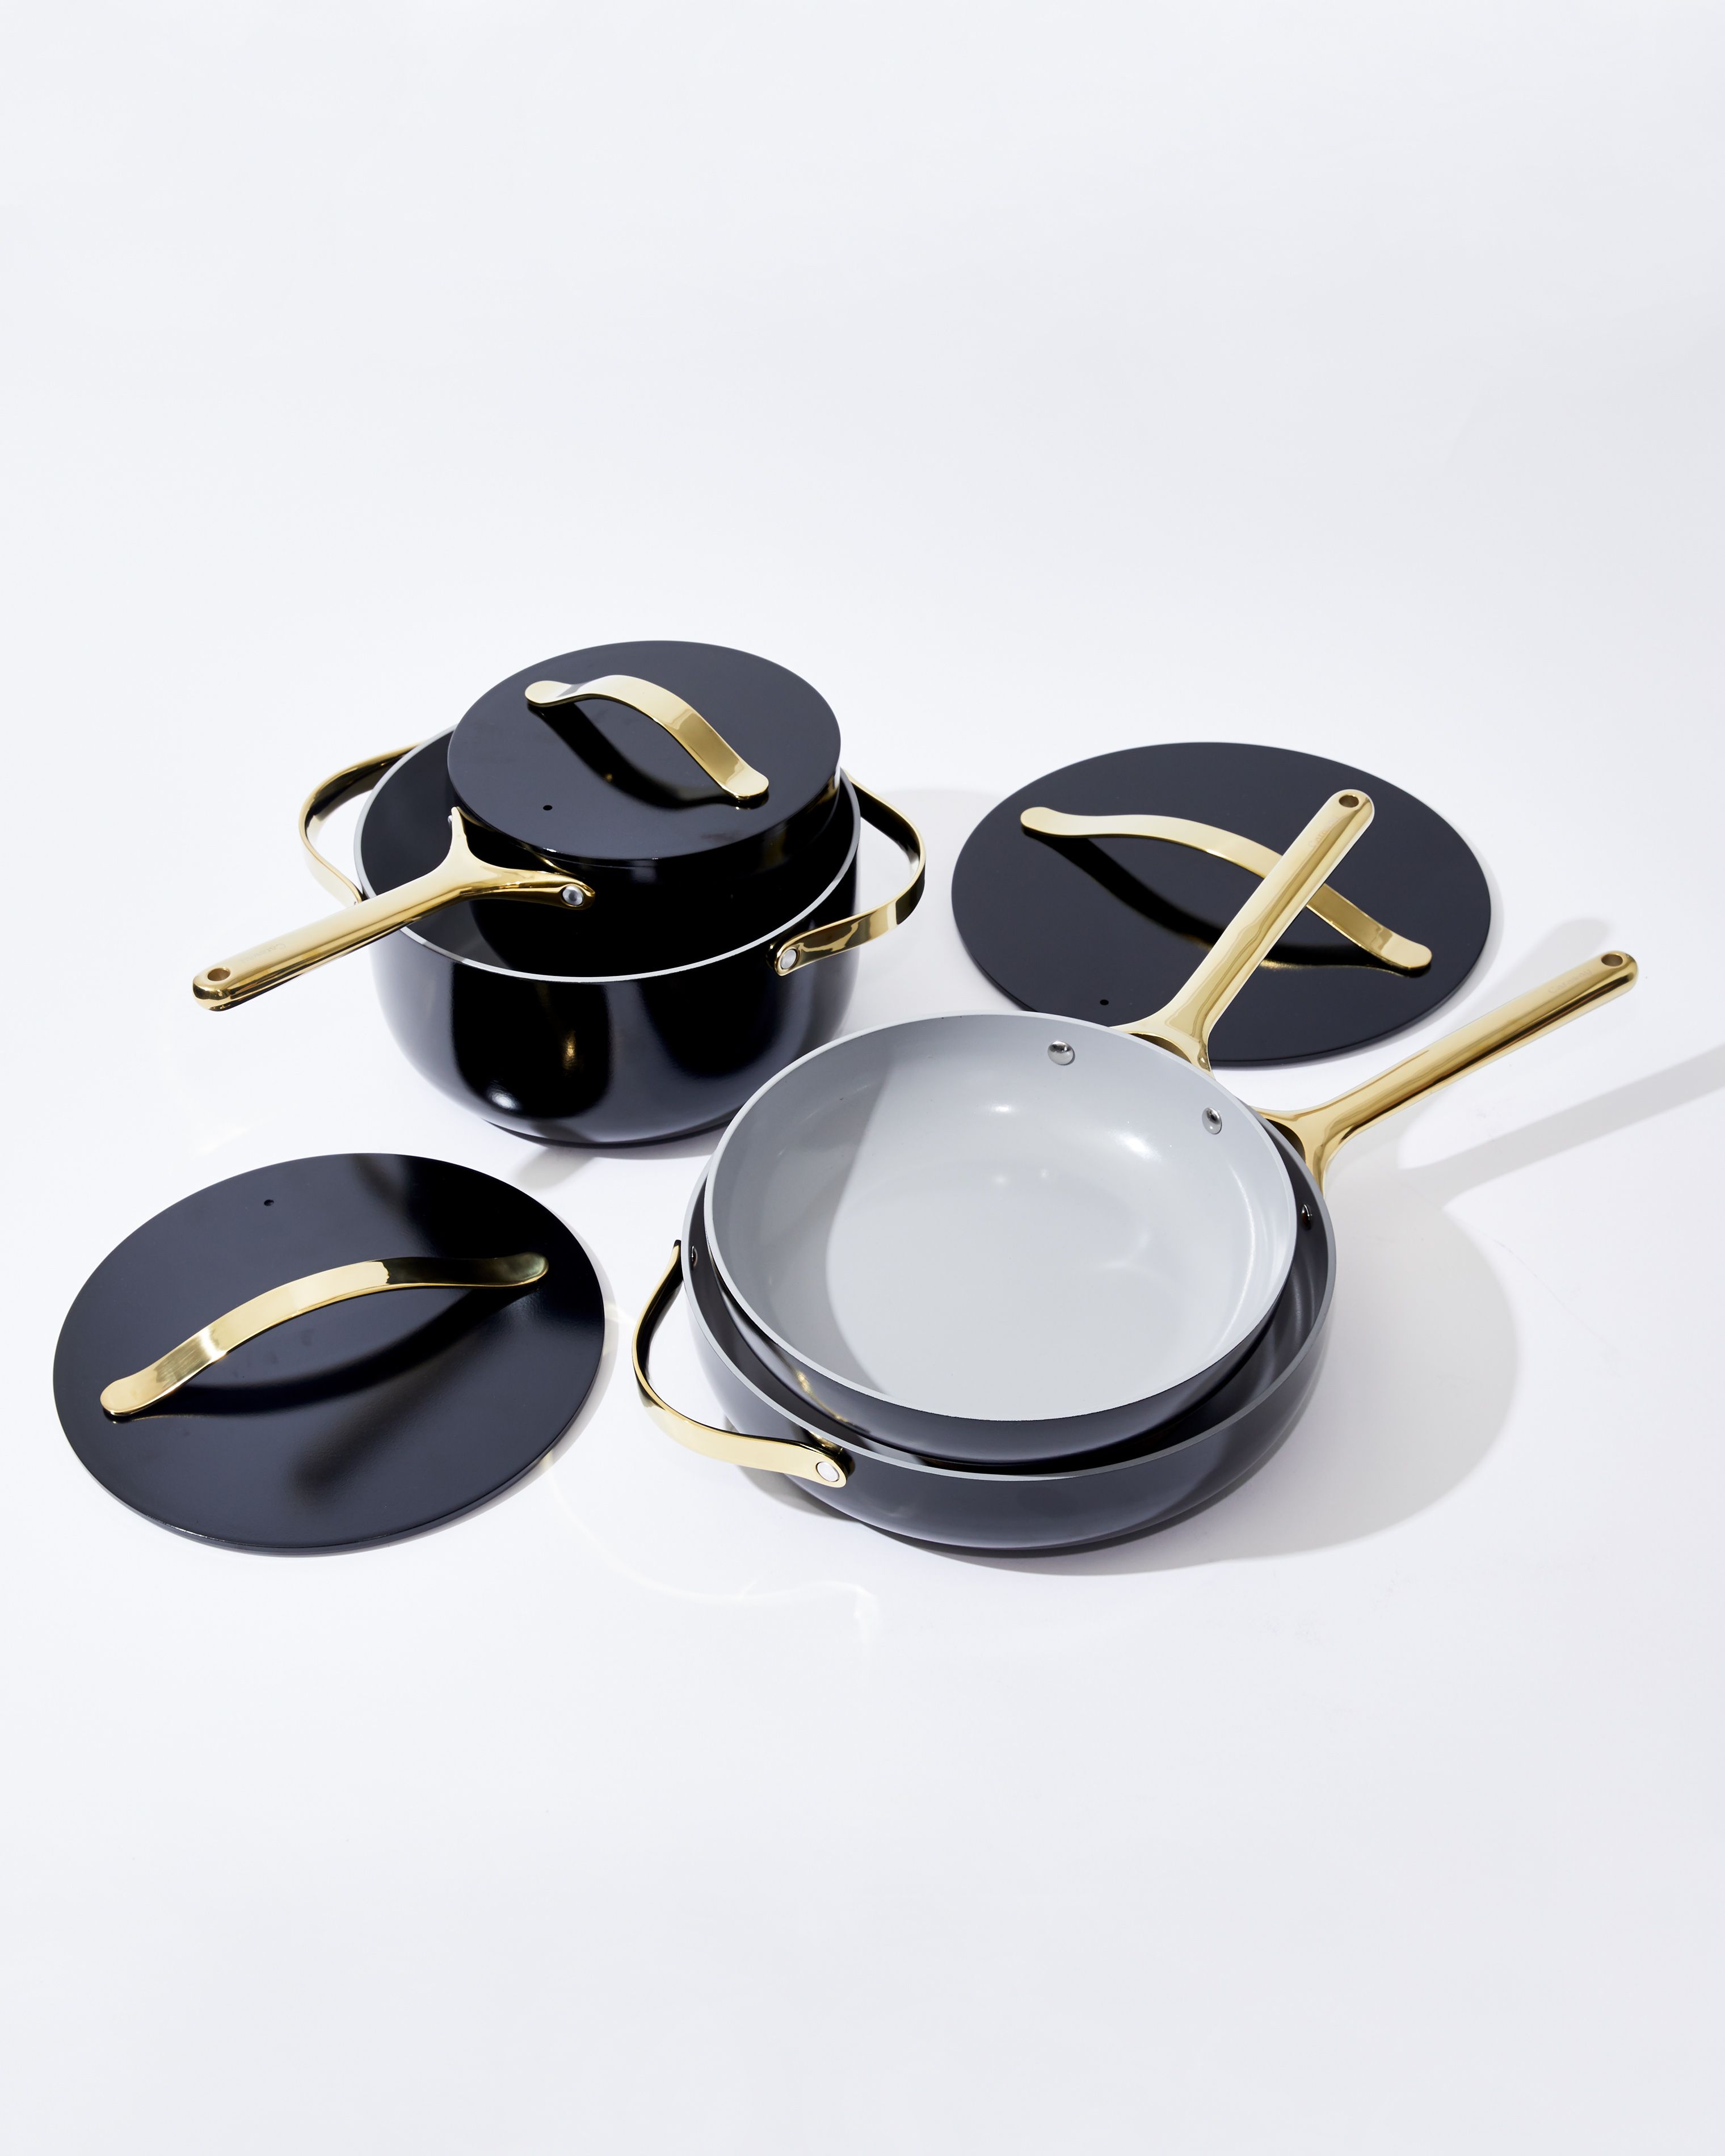 Our New Caraway Pots & Pans - Simply Organized